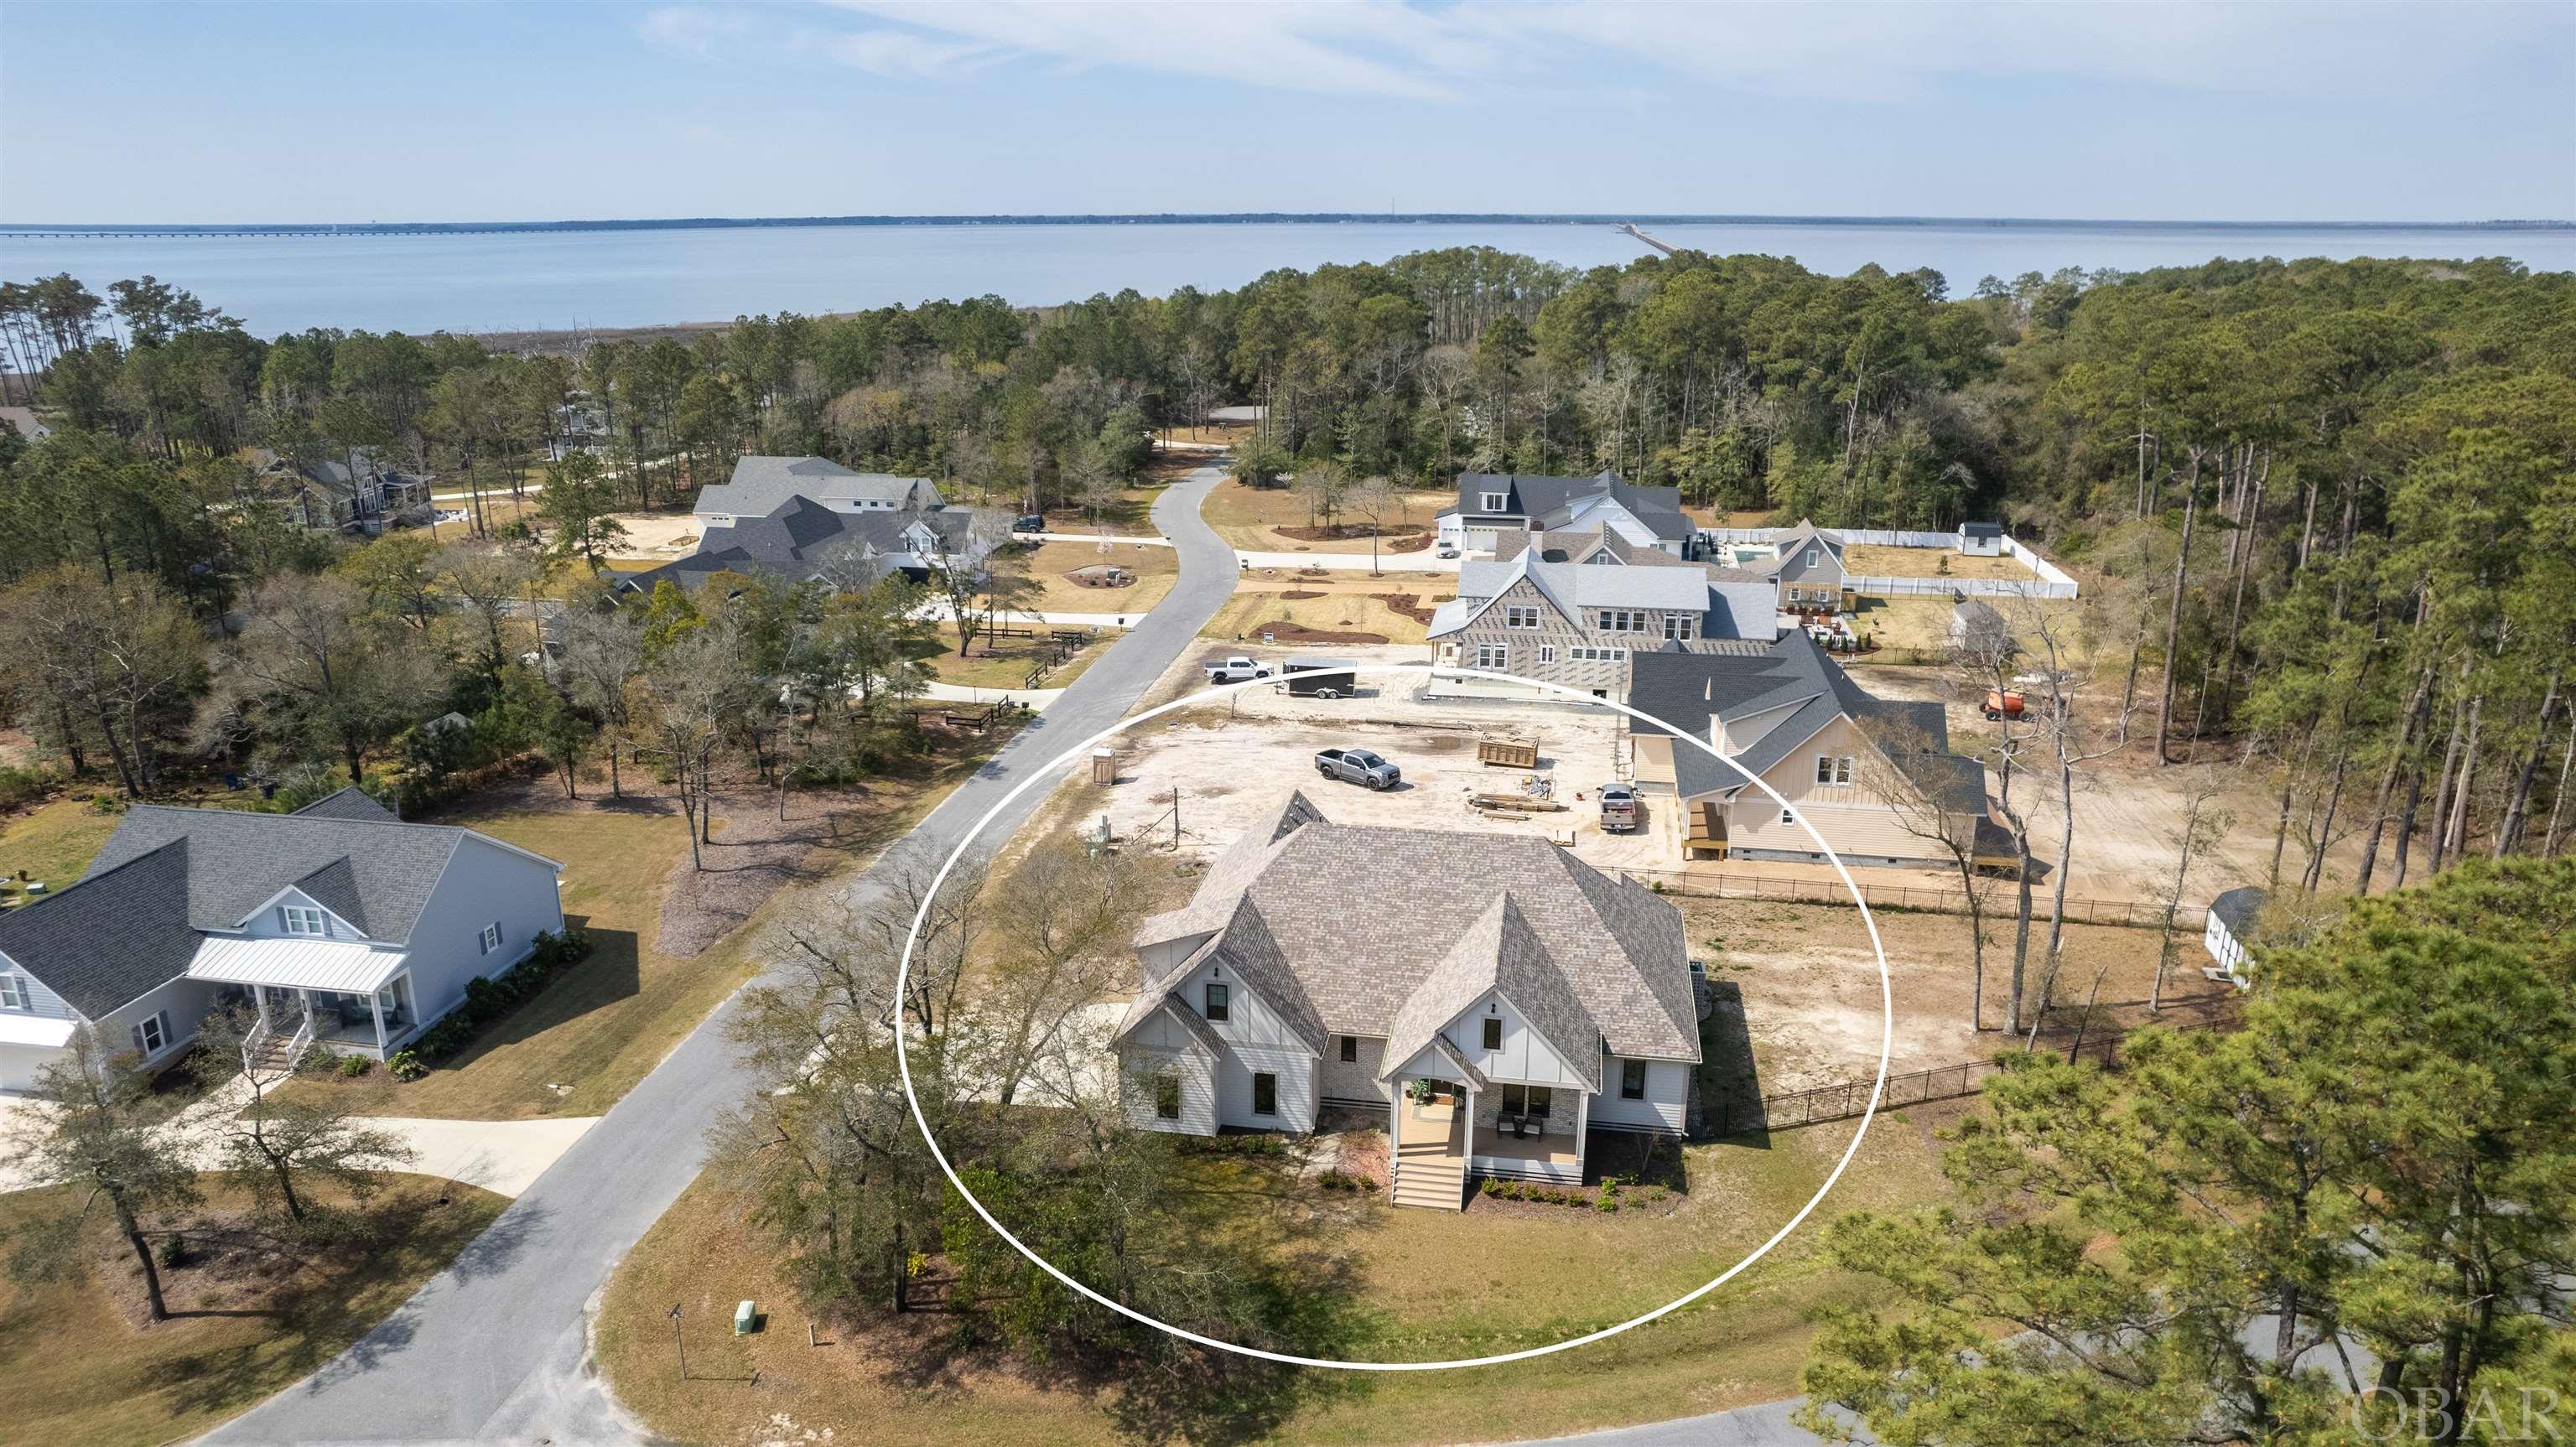 105 Chicora Ct, Manteo, NC 27954-8030, 5 Bedrooms Bedrooms, ,4 BathroomsBathrooms,Residential,For sale,Chicora Ct,125322